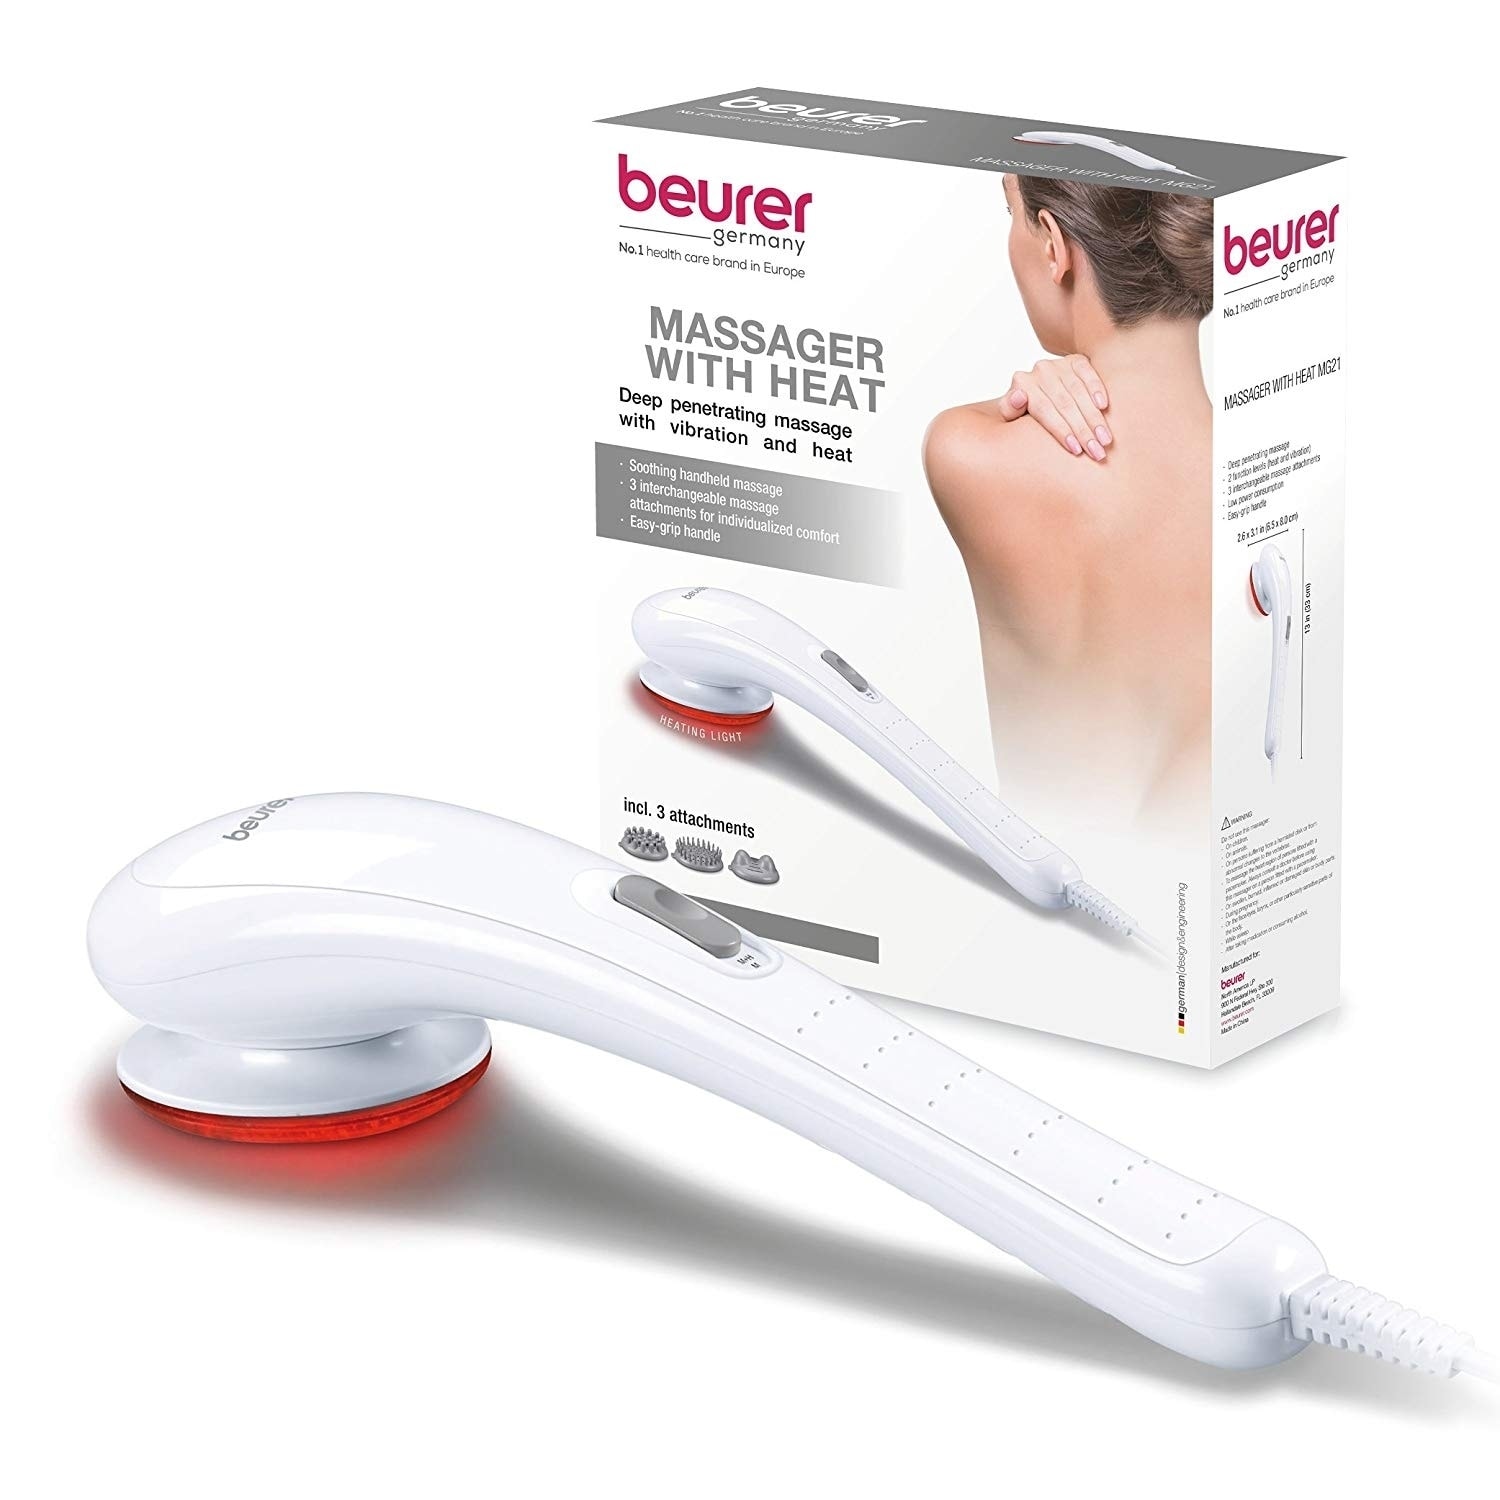 https://ak1.ostkcdn.com/images/products/21174098/Beurer-Handheld-Infrared-Massager-with-Deep-Tissue-Massaging-for-Muscle-Pain-Relief-3-Attachments-MG21-b69fc765-def9-4745-a7f6-4331c800a99d.jpg